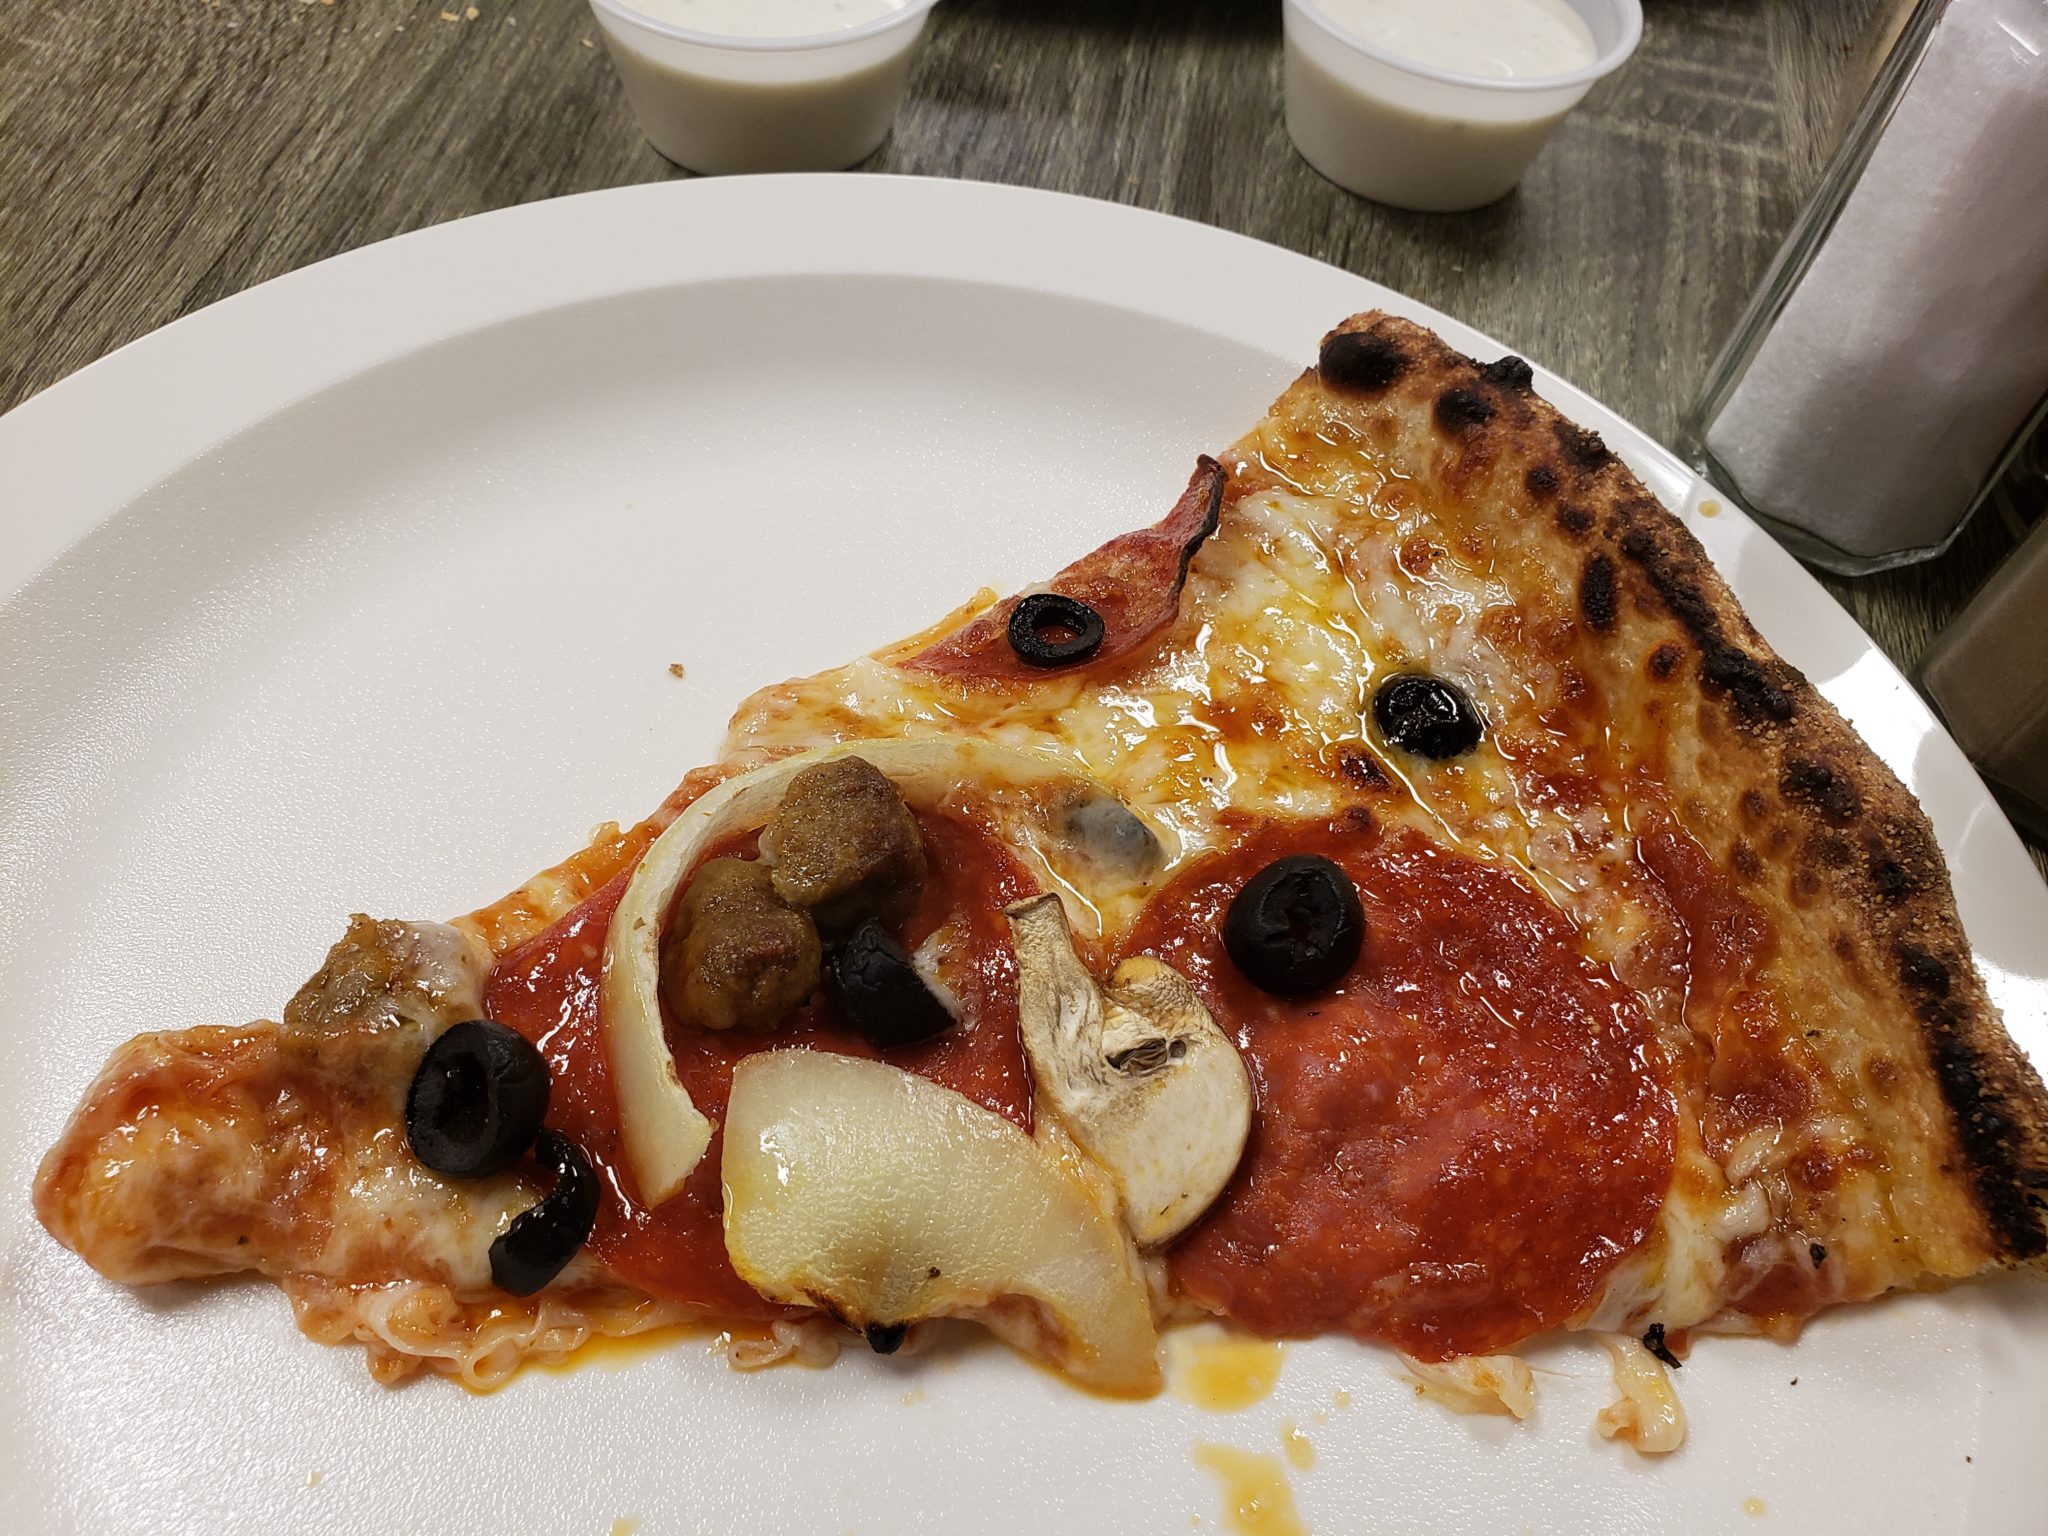 a slice of pizza on a plate